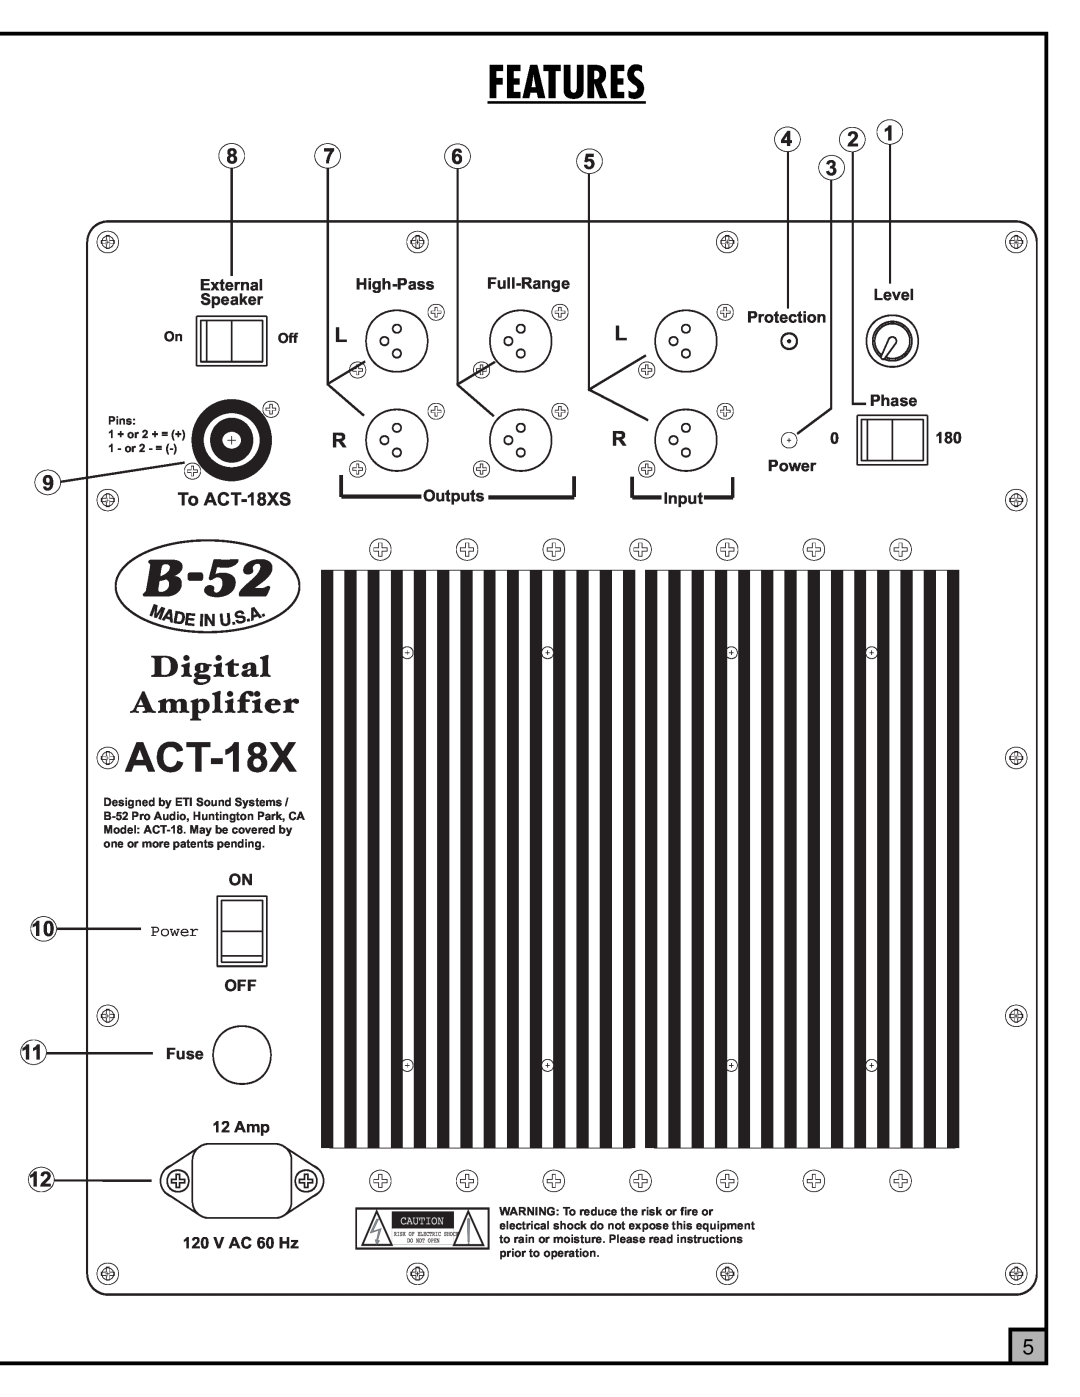 ETI Sound Systems, INC ACT-18X manual B-52, Features, Digital, Amplifier 